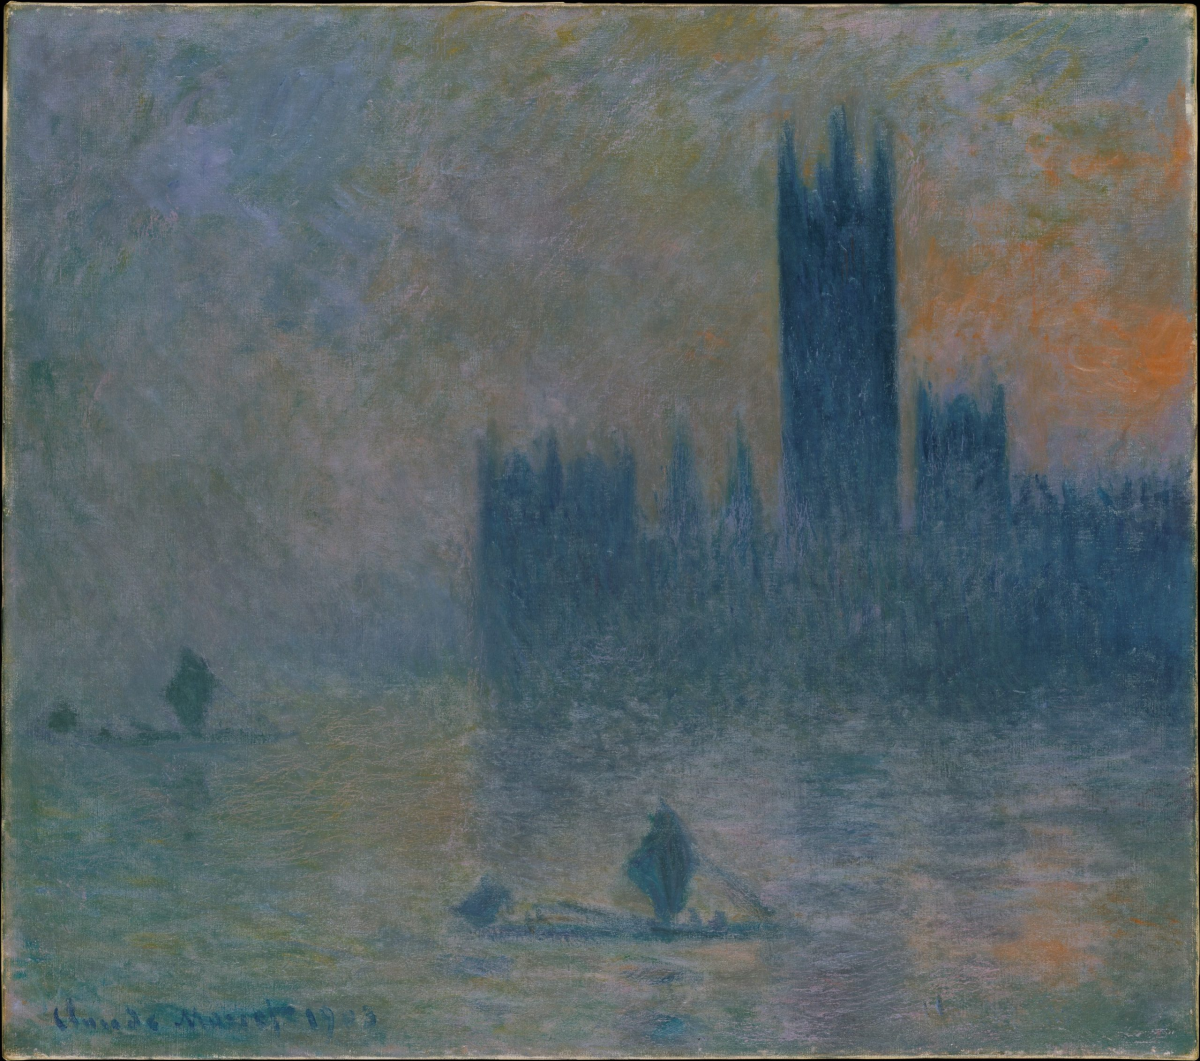 Did air pollution help create the Impressionists?